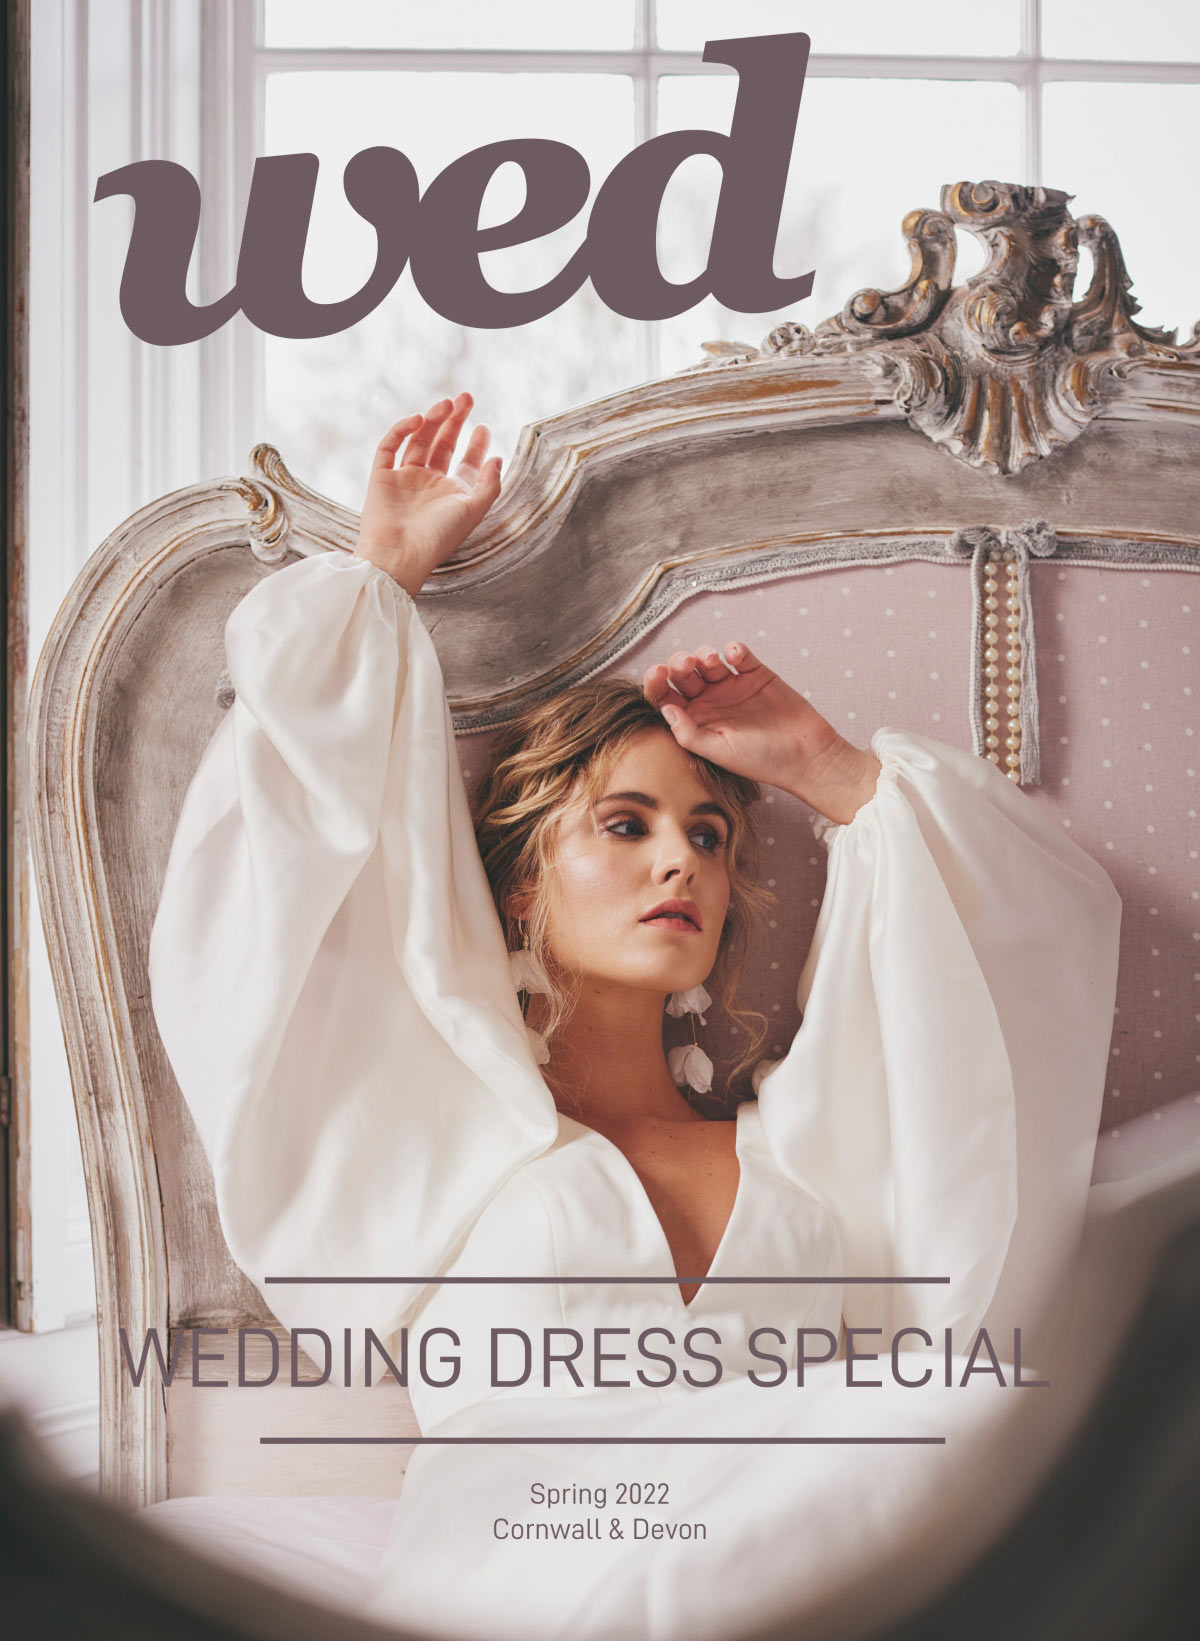 Wed's Wedding Dress Special